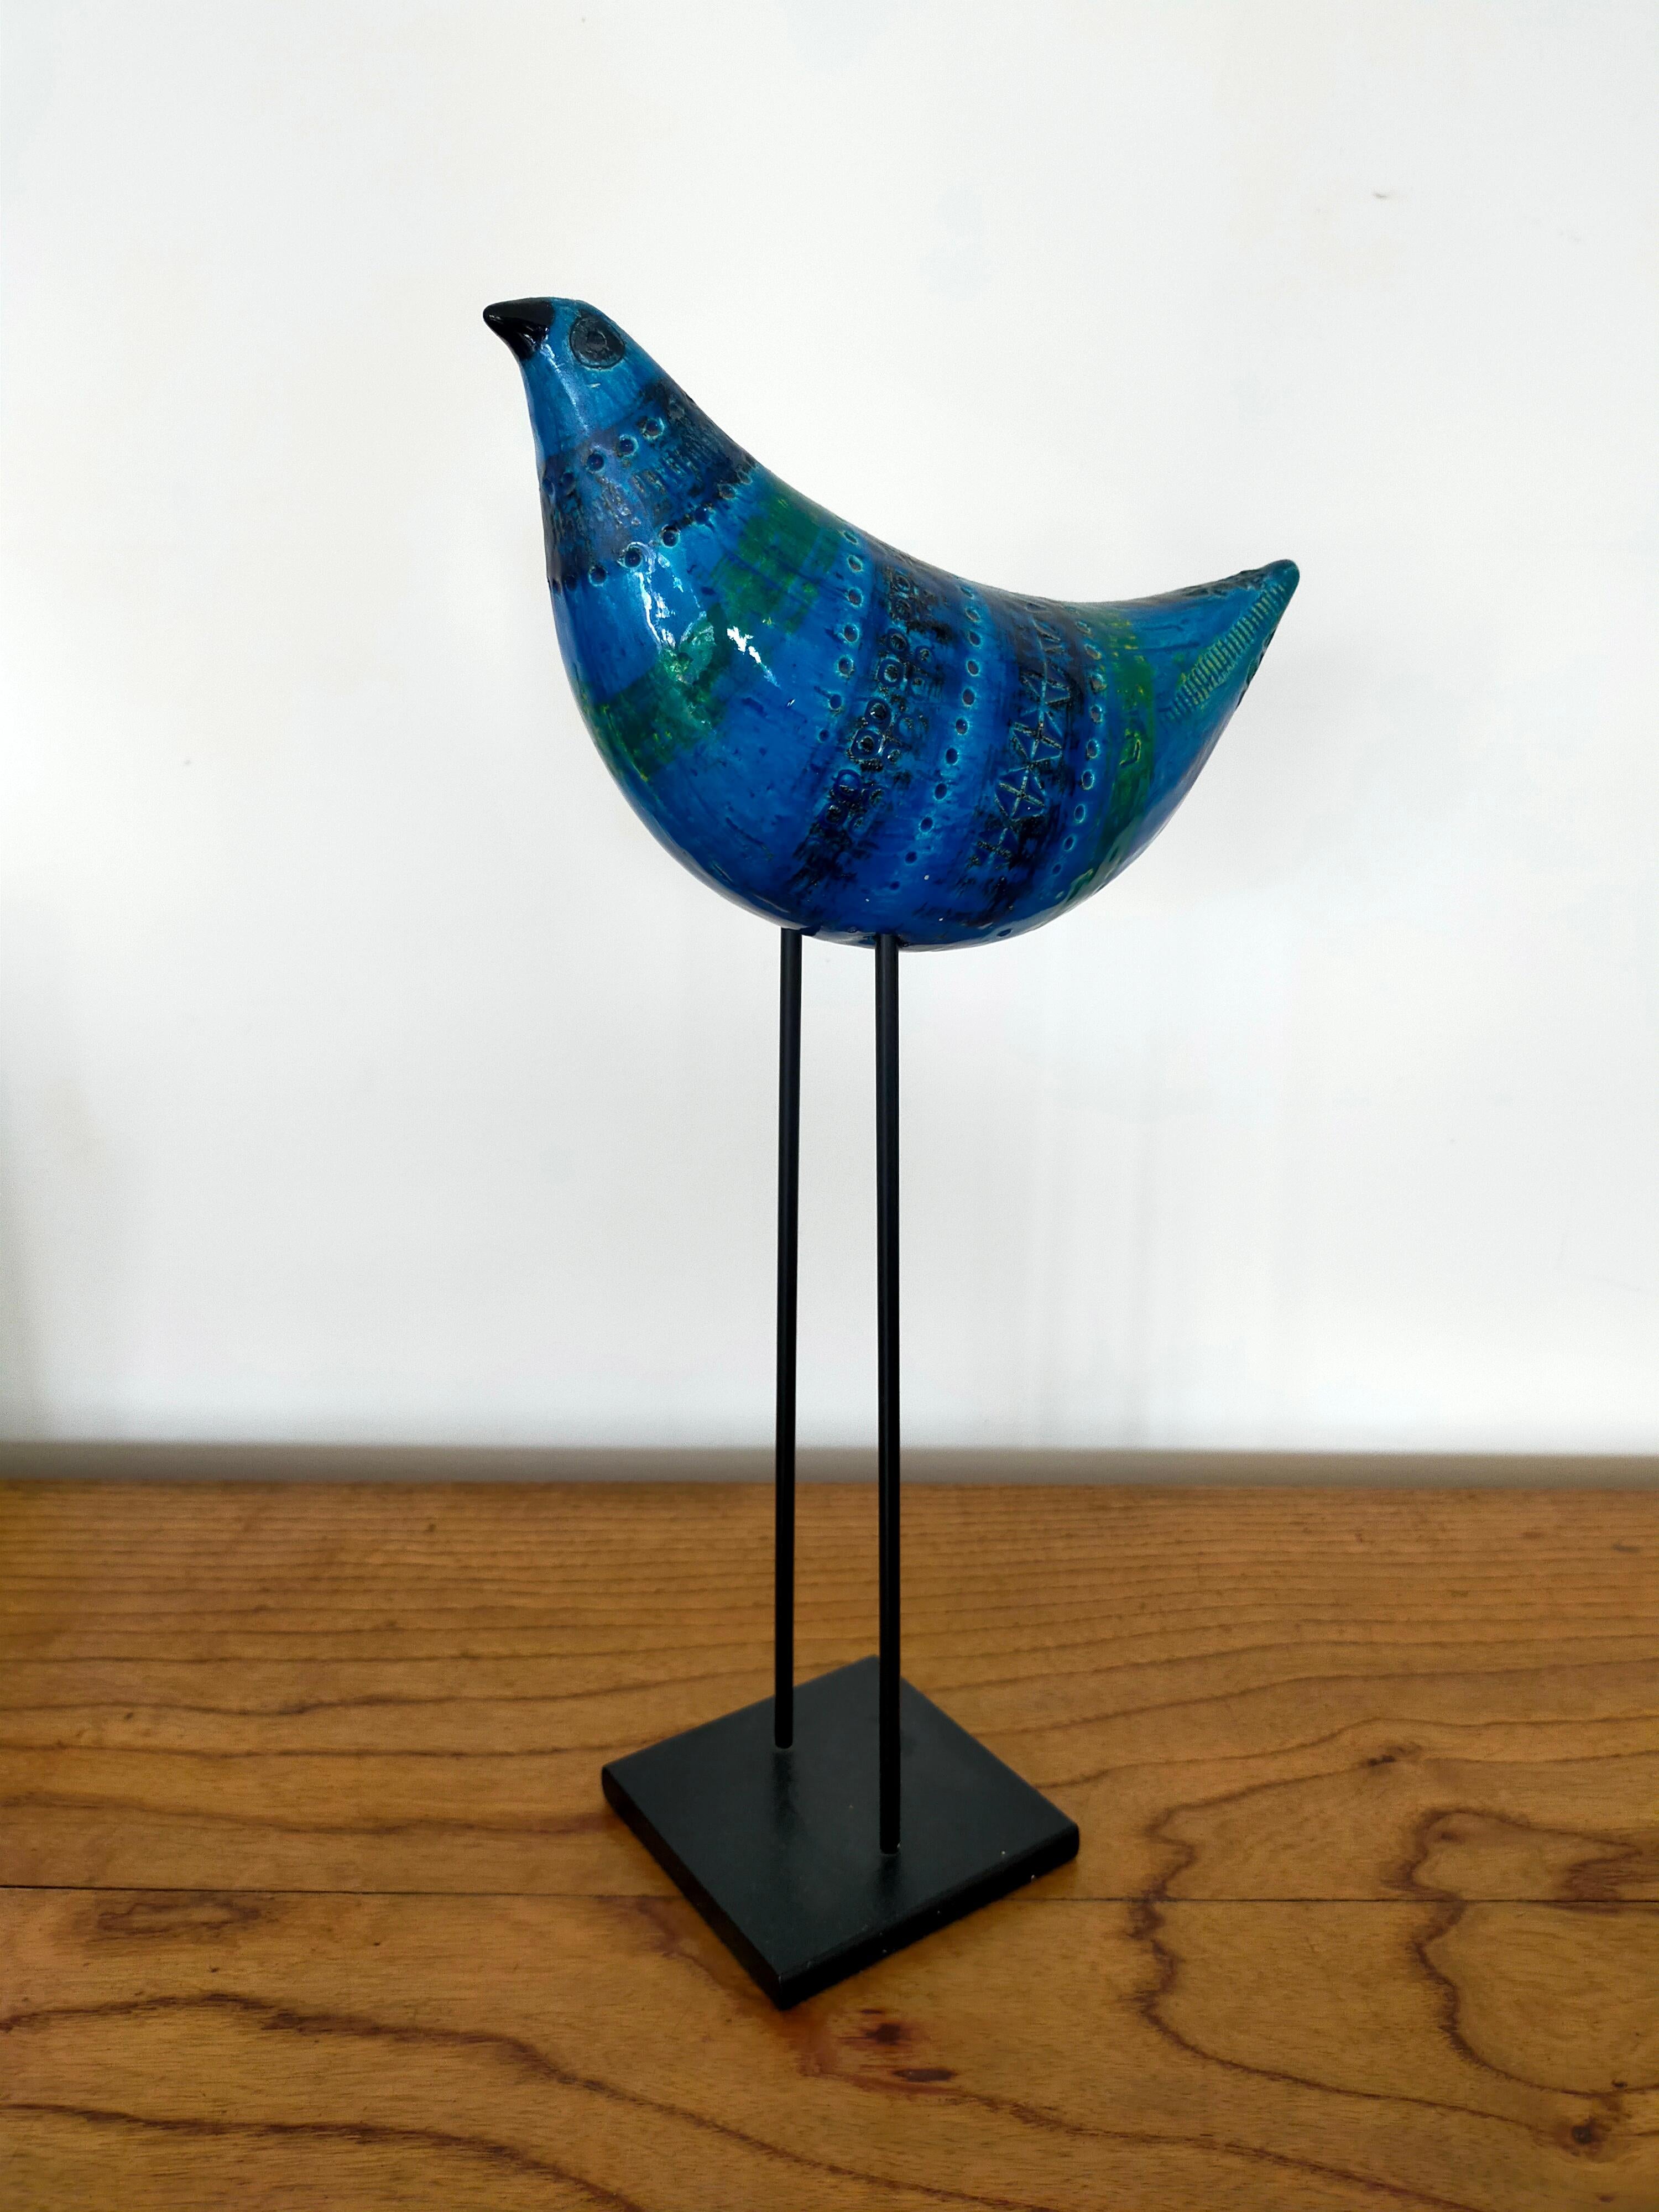 Blue ceramic bird on iron black basement engraved by hand and enamelled in bright blue and green colors with their characteristic patterns. 
Marked 